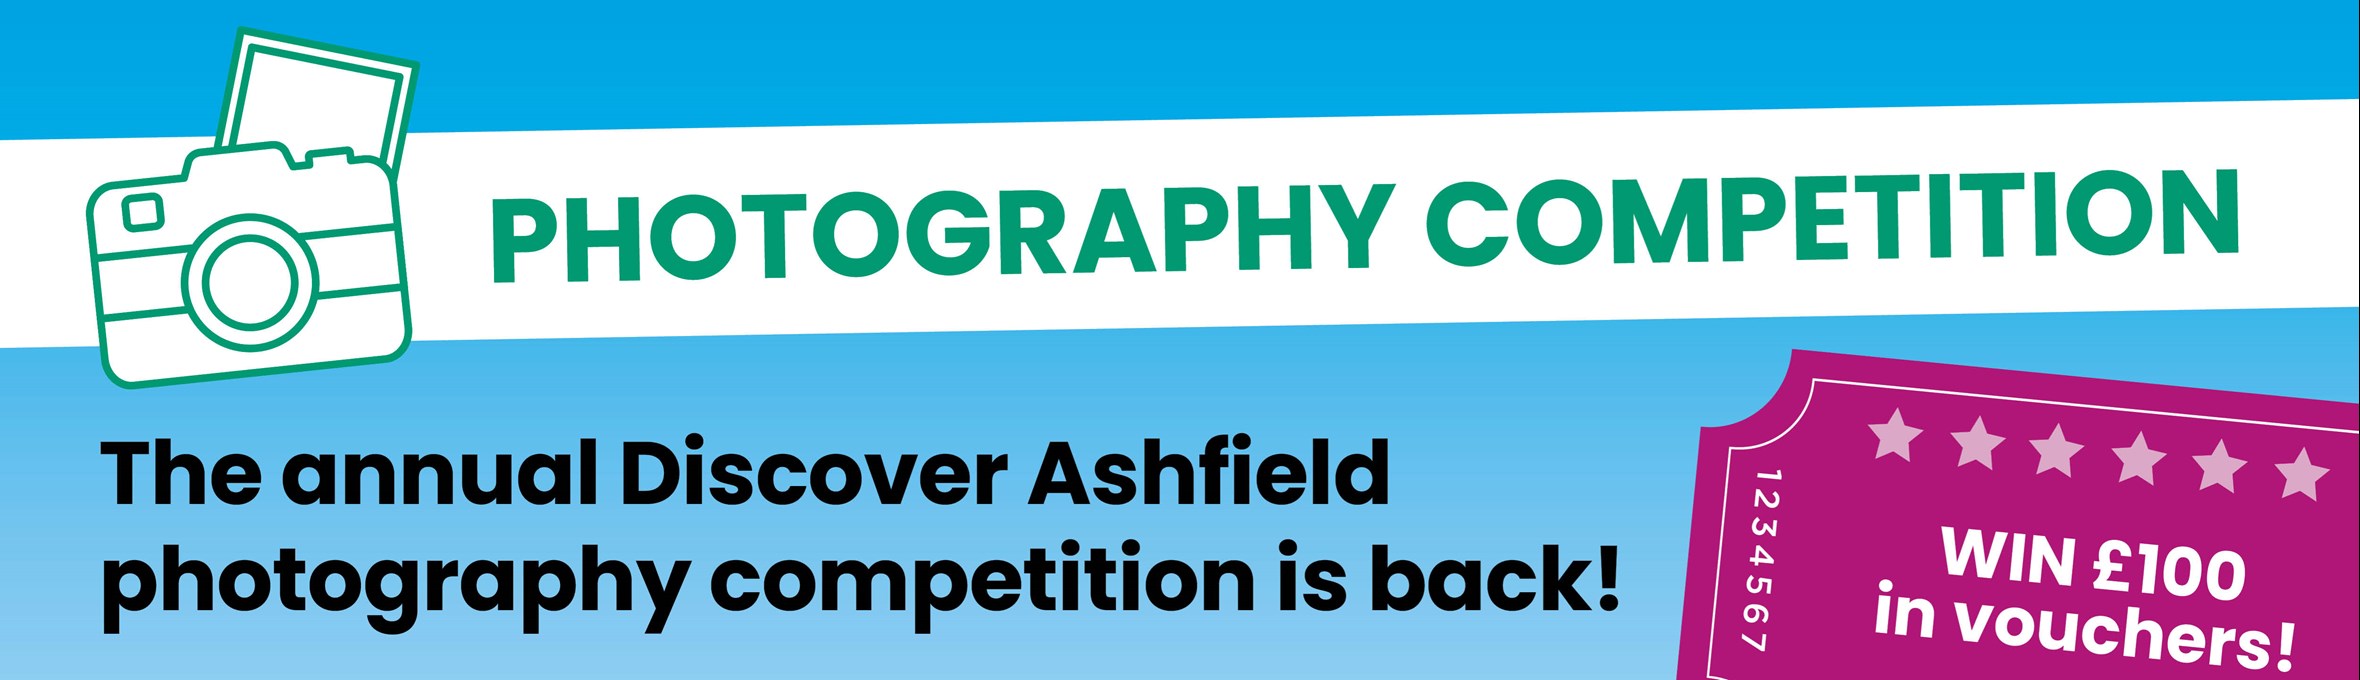 Advertisement for the Discover Ashfield Photography Competition  